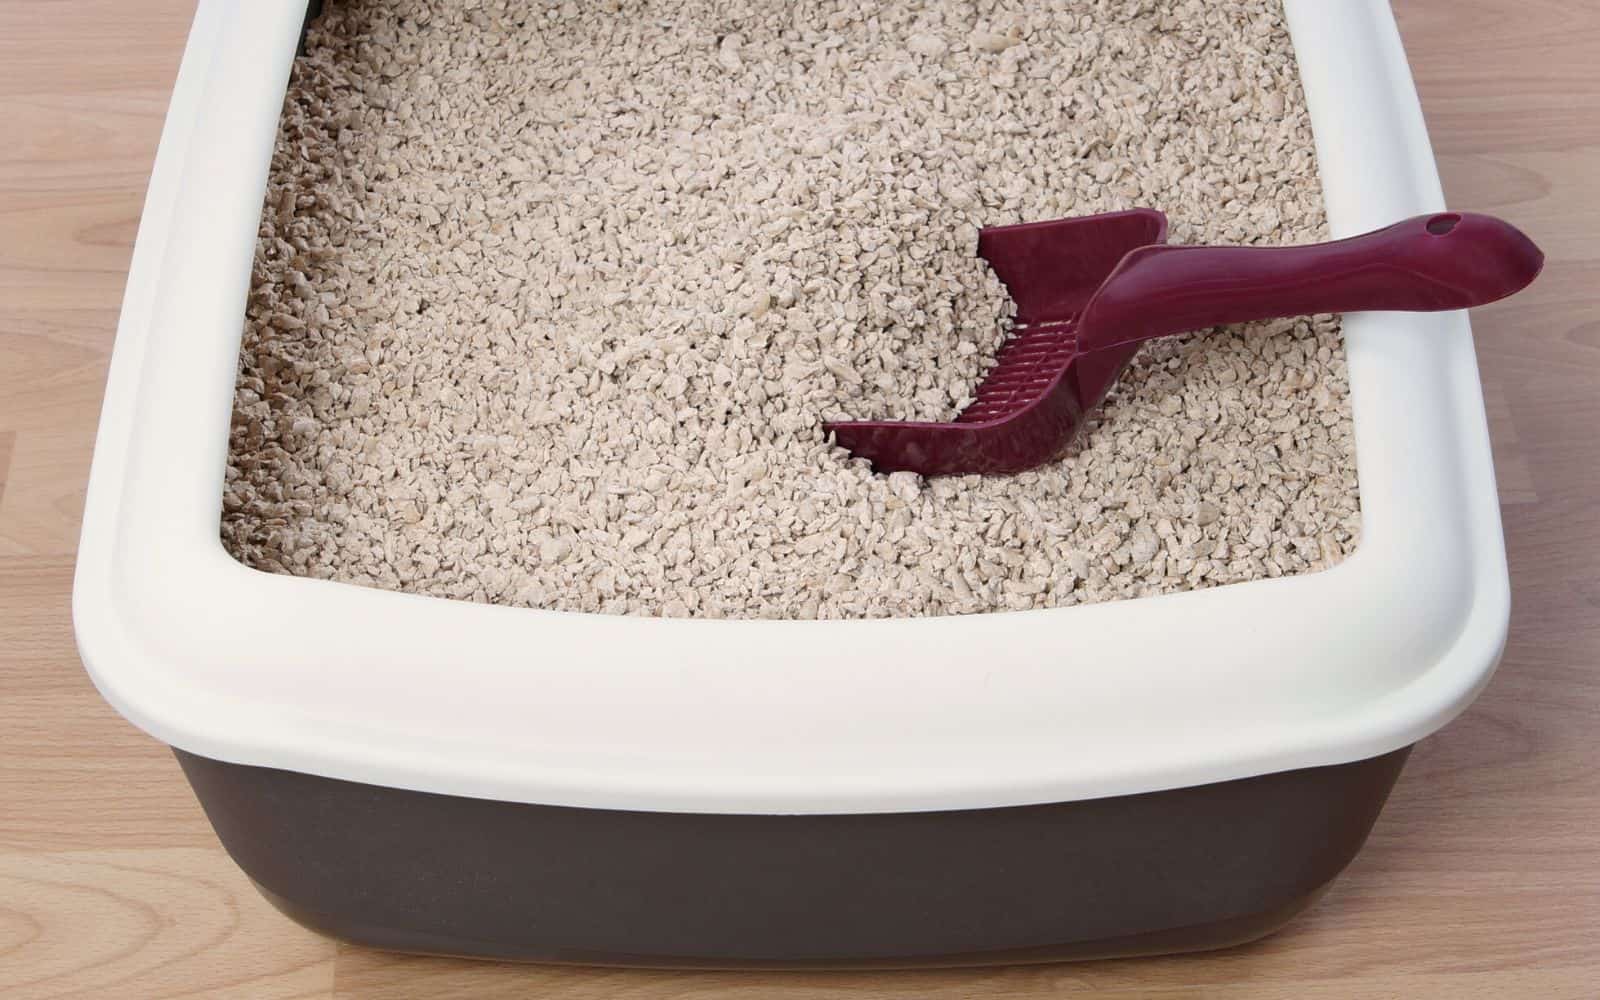 dark brown litter box with a cream coloured edge holding pellet style litter and a burgundy litter scoop